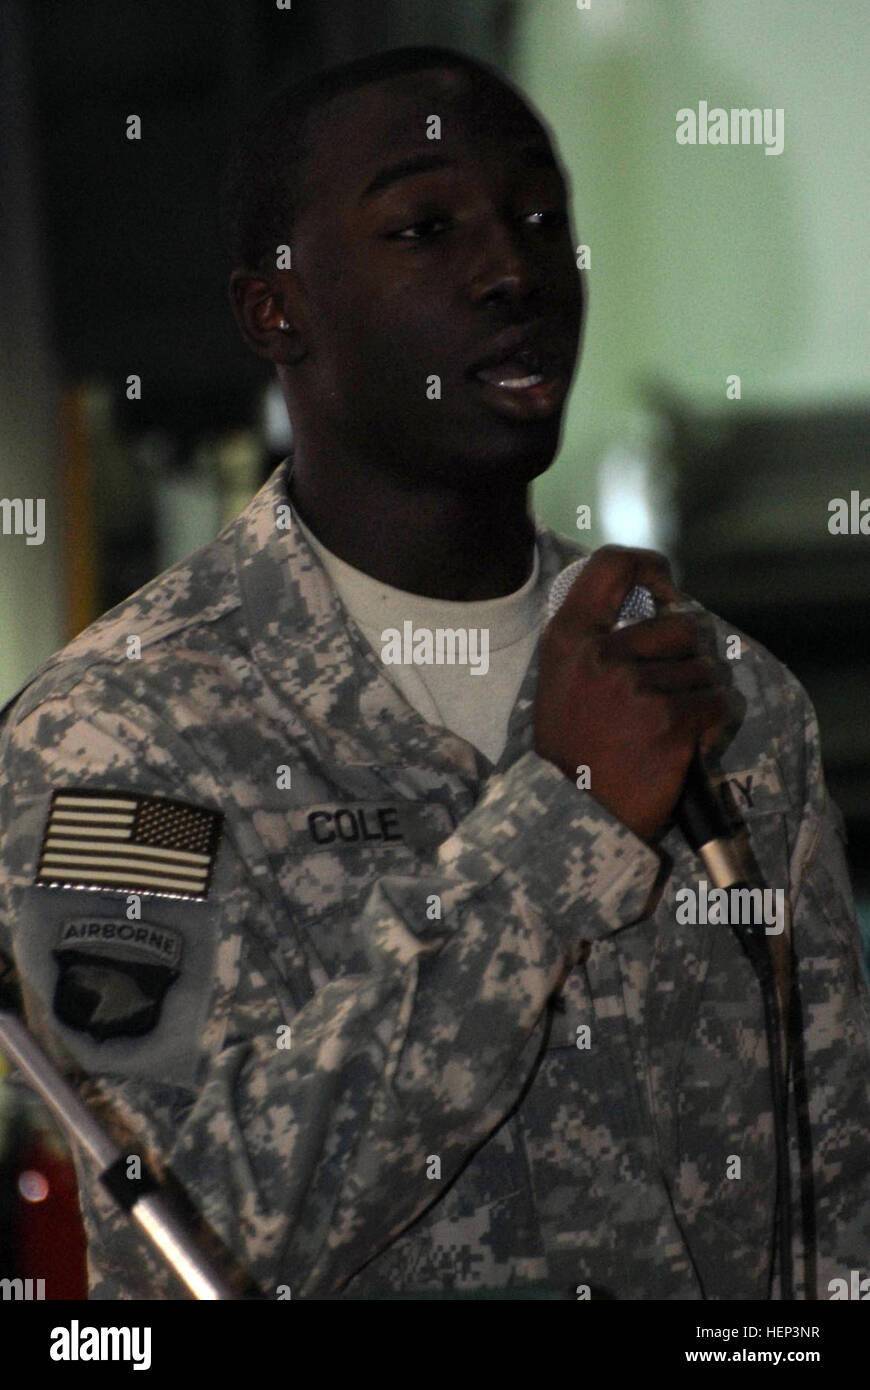 Sgt. Victor Cole, a human resources sergeant, Headquarters and Headquarters Detachment, 716th Military Police Battalion, a native of Indianapolis, sings the national anthem during a non-commissioned officer induction ceremony, June 21, 2008, at Camp Liberty. The 716th MP Bn. is deployed from Fort Campbell, Ky., and is currently assigned to the 18th Military Police Brigade, Multi-National Division - Baghdad. Soldier sings his way through deployment 111501 Stock Photo